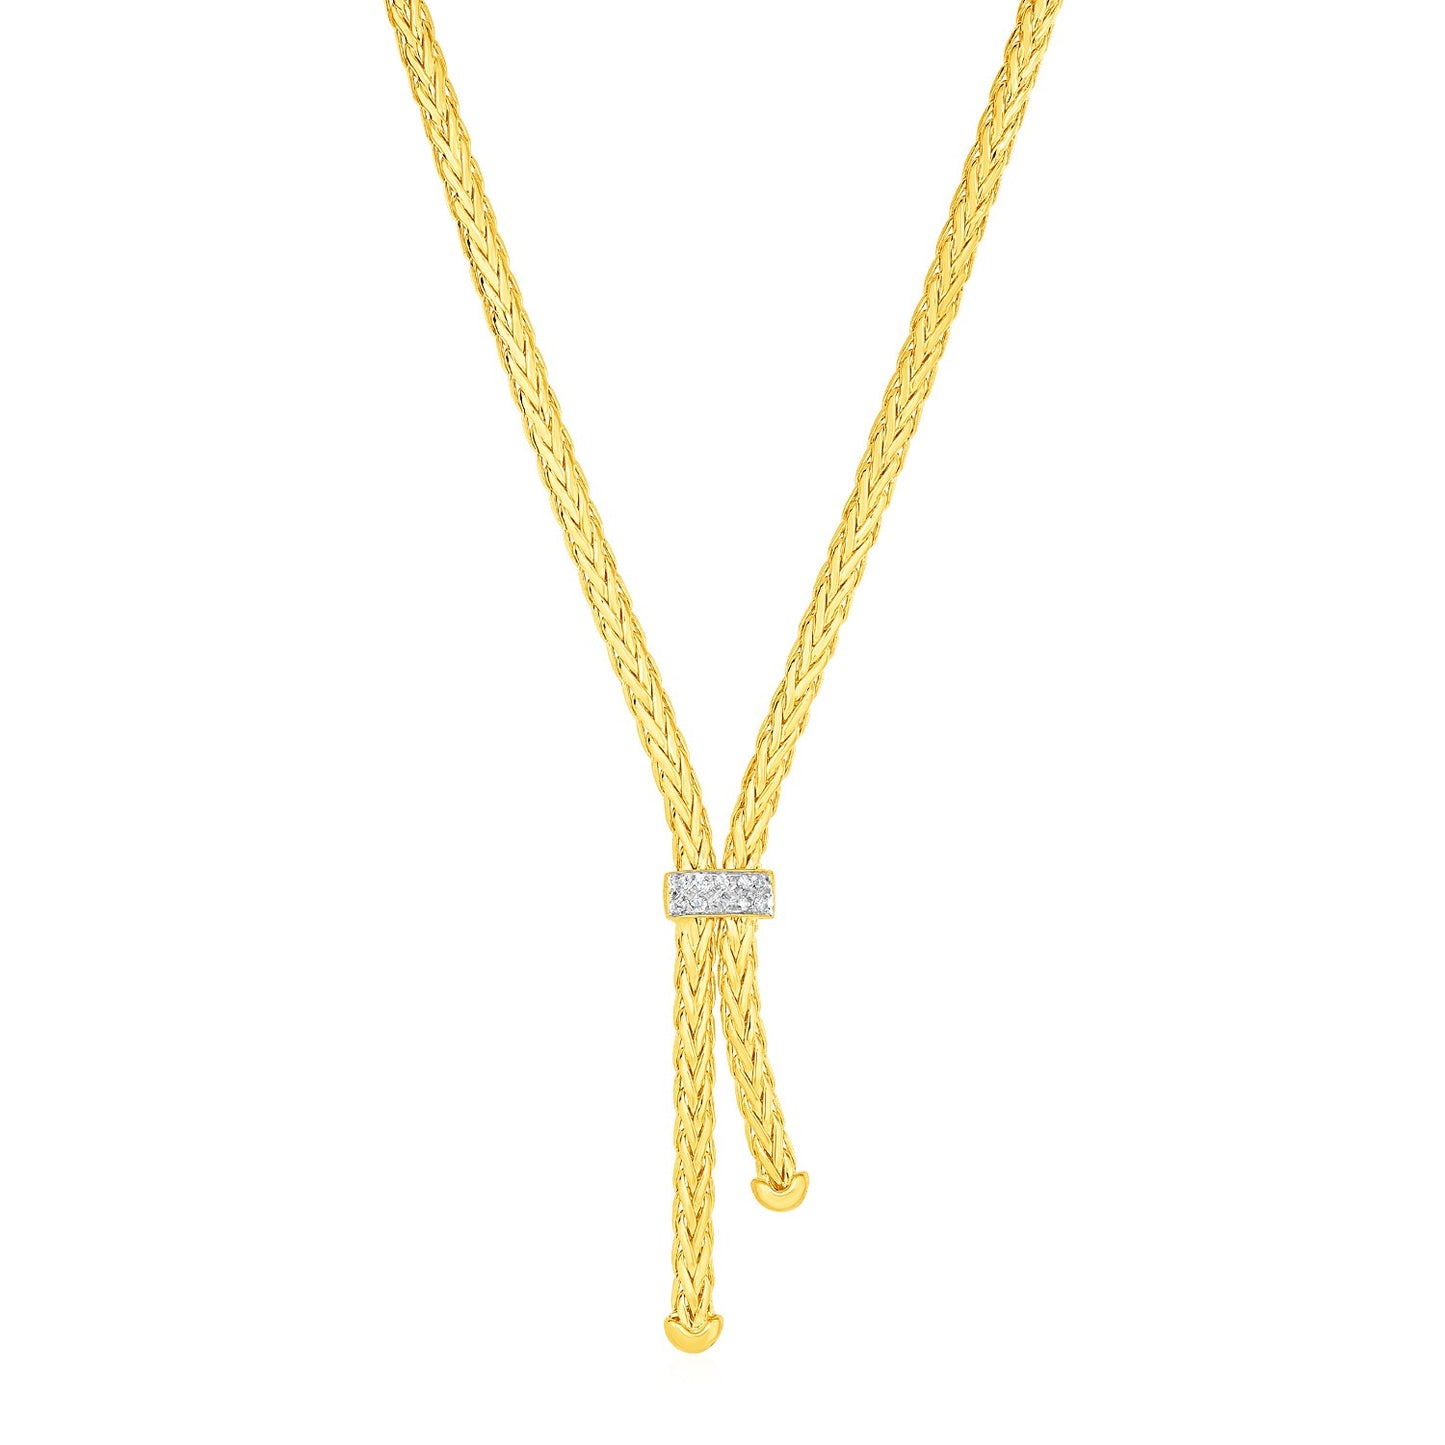 Woven Rope Lariat Necklace in 14k Solid Yellow Gold